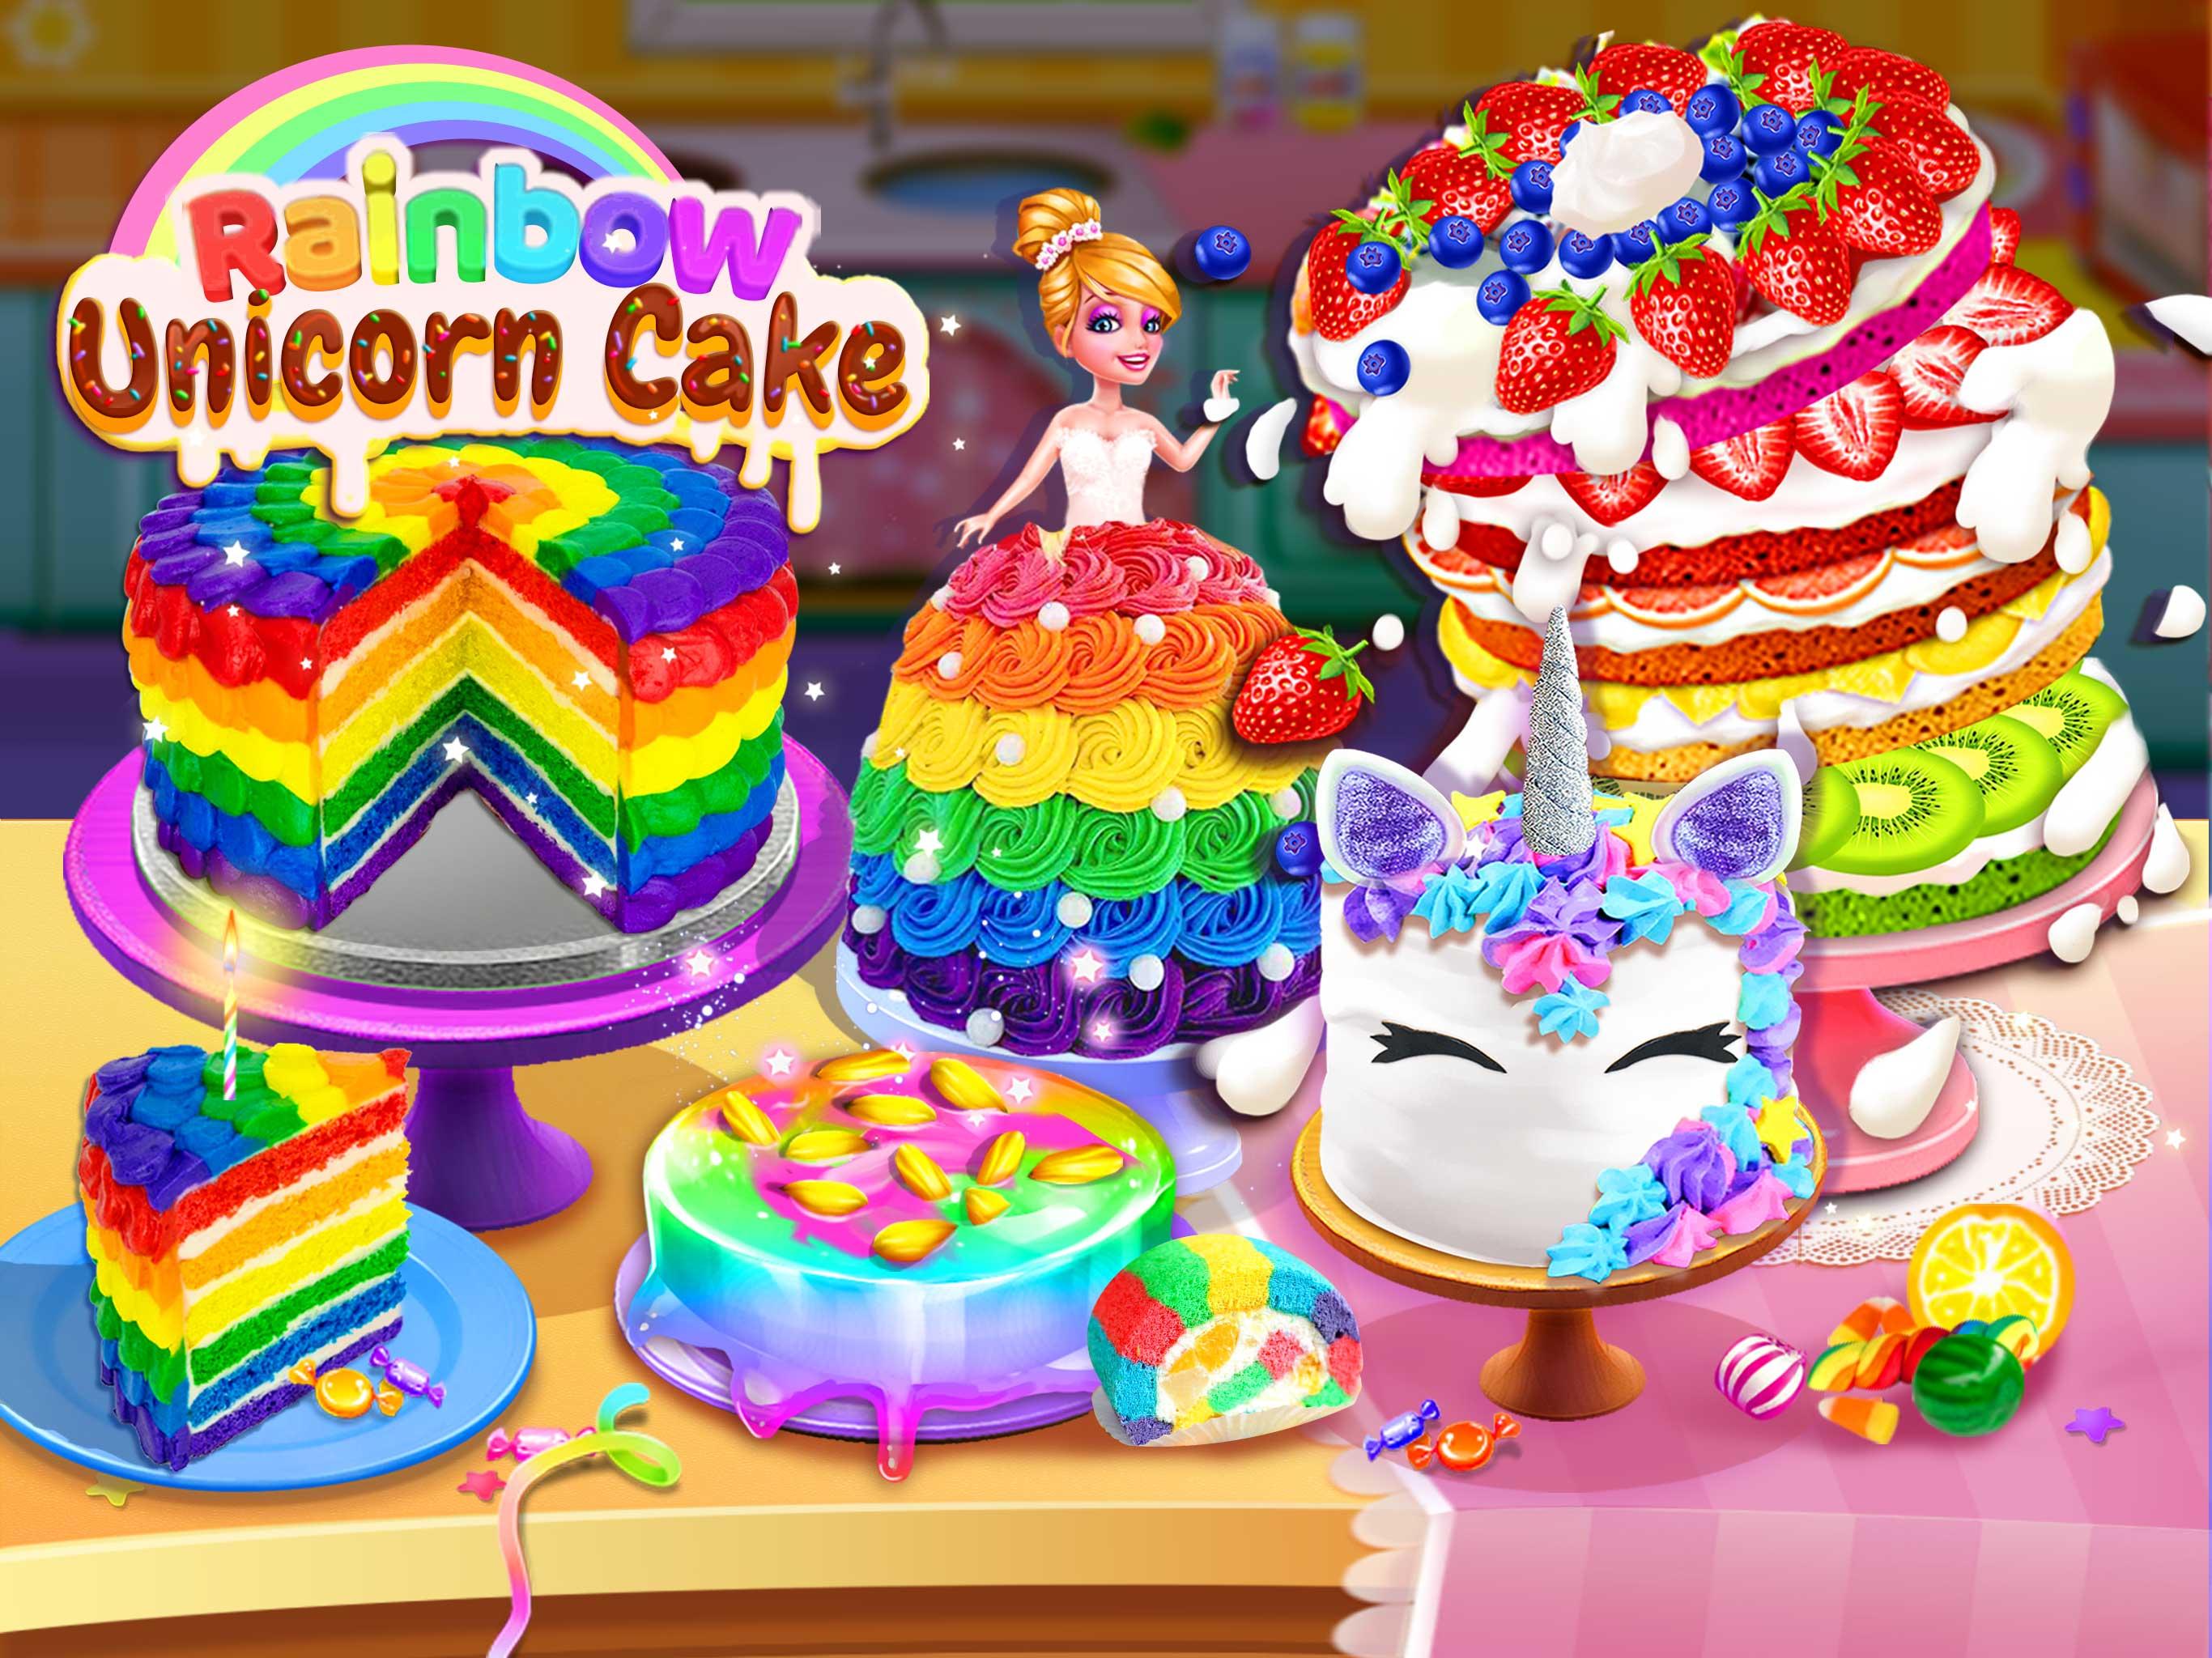 Rainbow Unicorn Cake Maker: Free Cooking Games APK 1.2 Download for